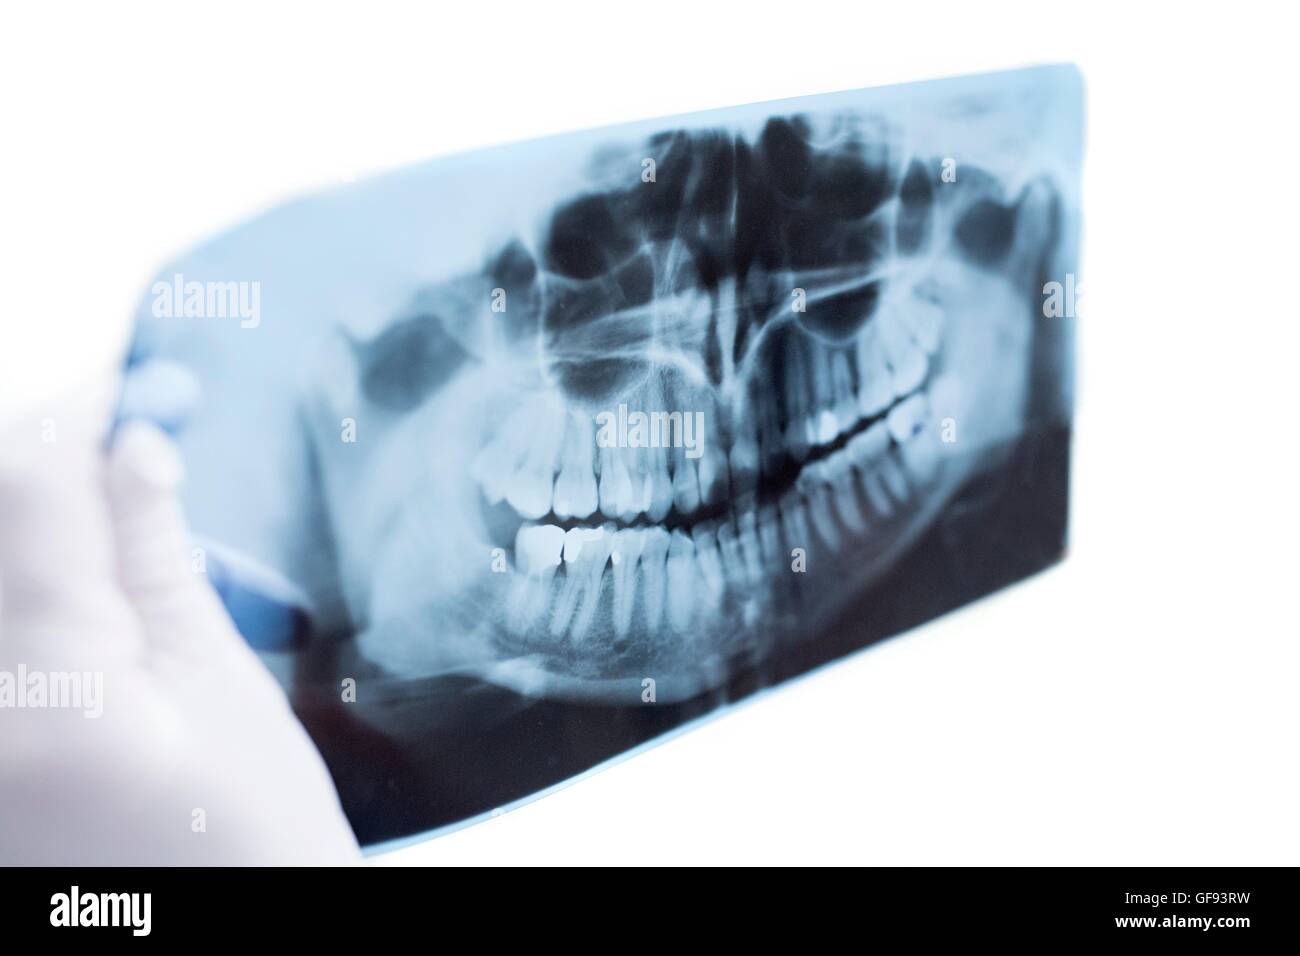 Dentist holding teeth model and medical x-ray in hospital. Stock Photo